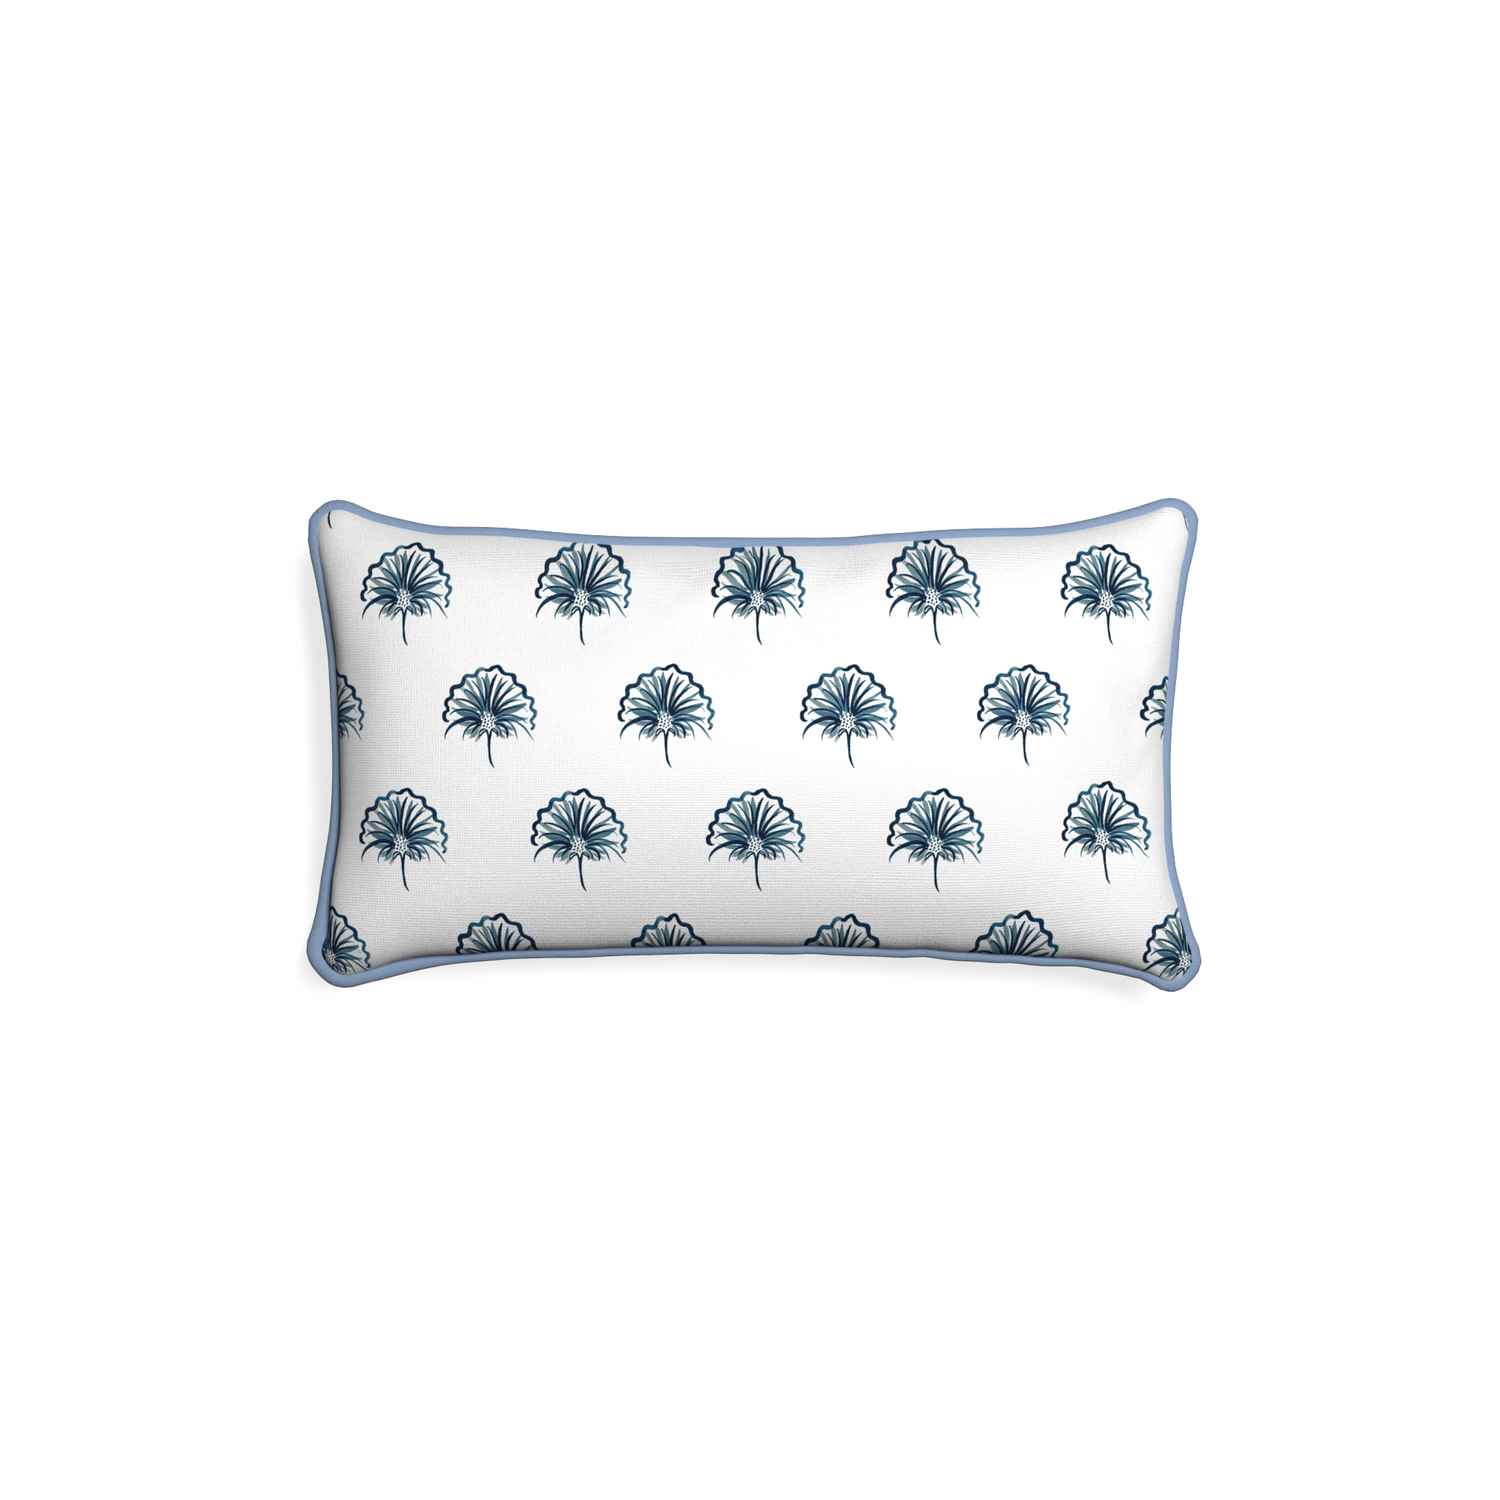 Petite-lumbar penelope midnight custom floral navypillow with sky piping on white background